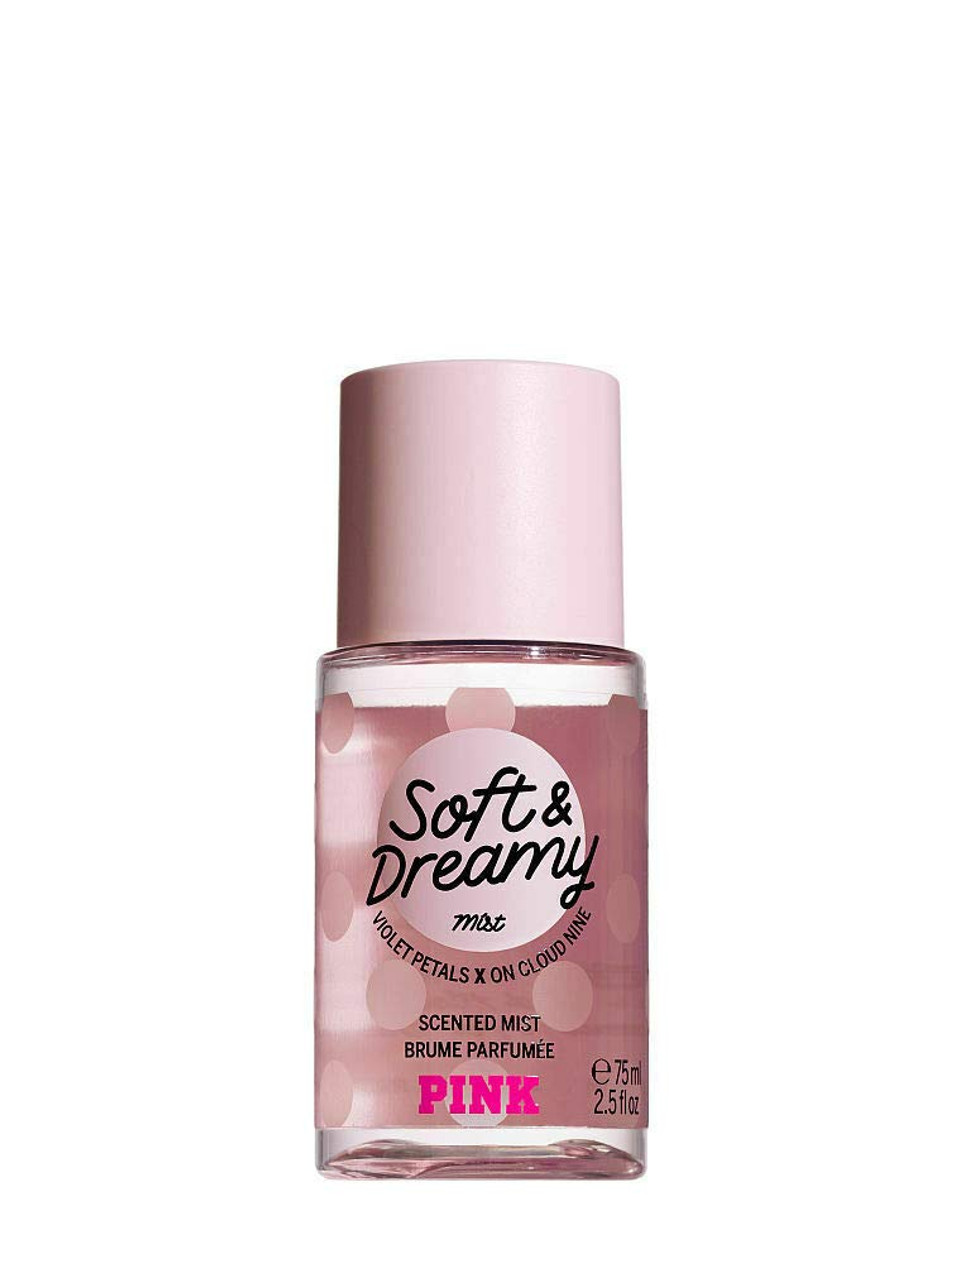 Victoria's Secret Pink Warm Vanilla Body Mist is My Fall Signature Scent  (Maybe!) - Musings of a Muse